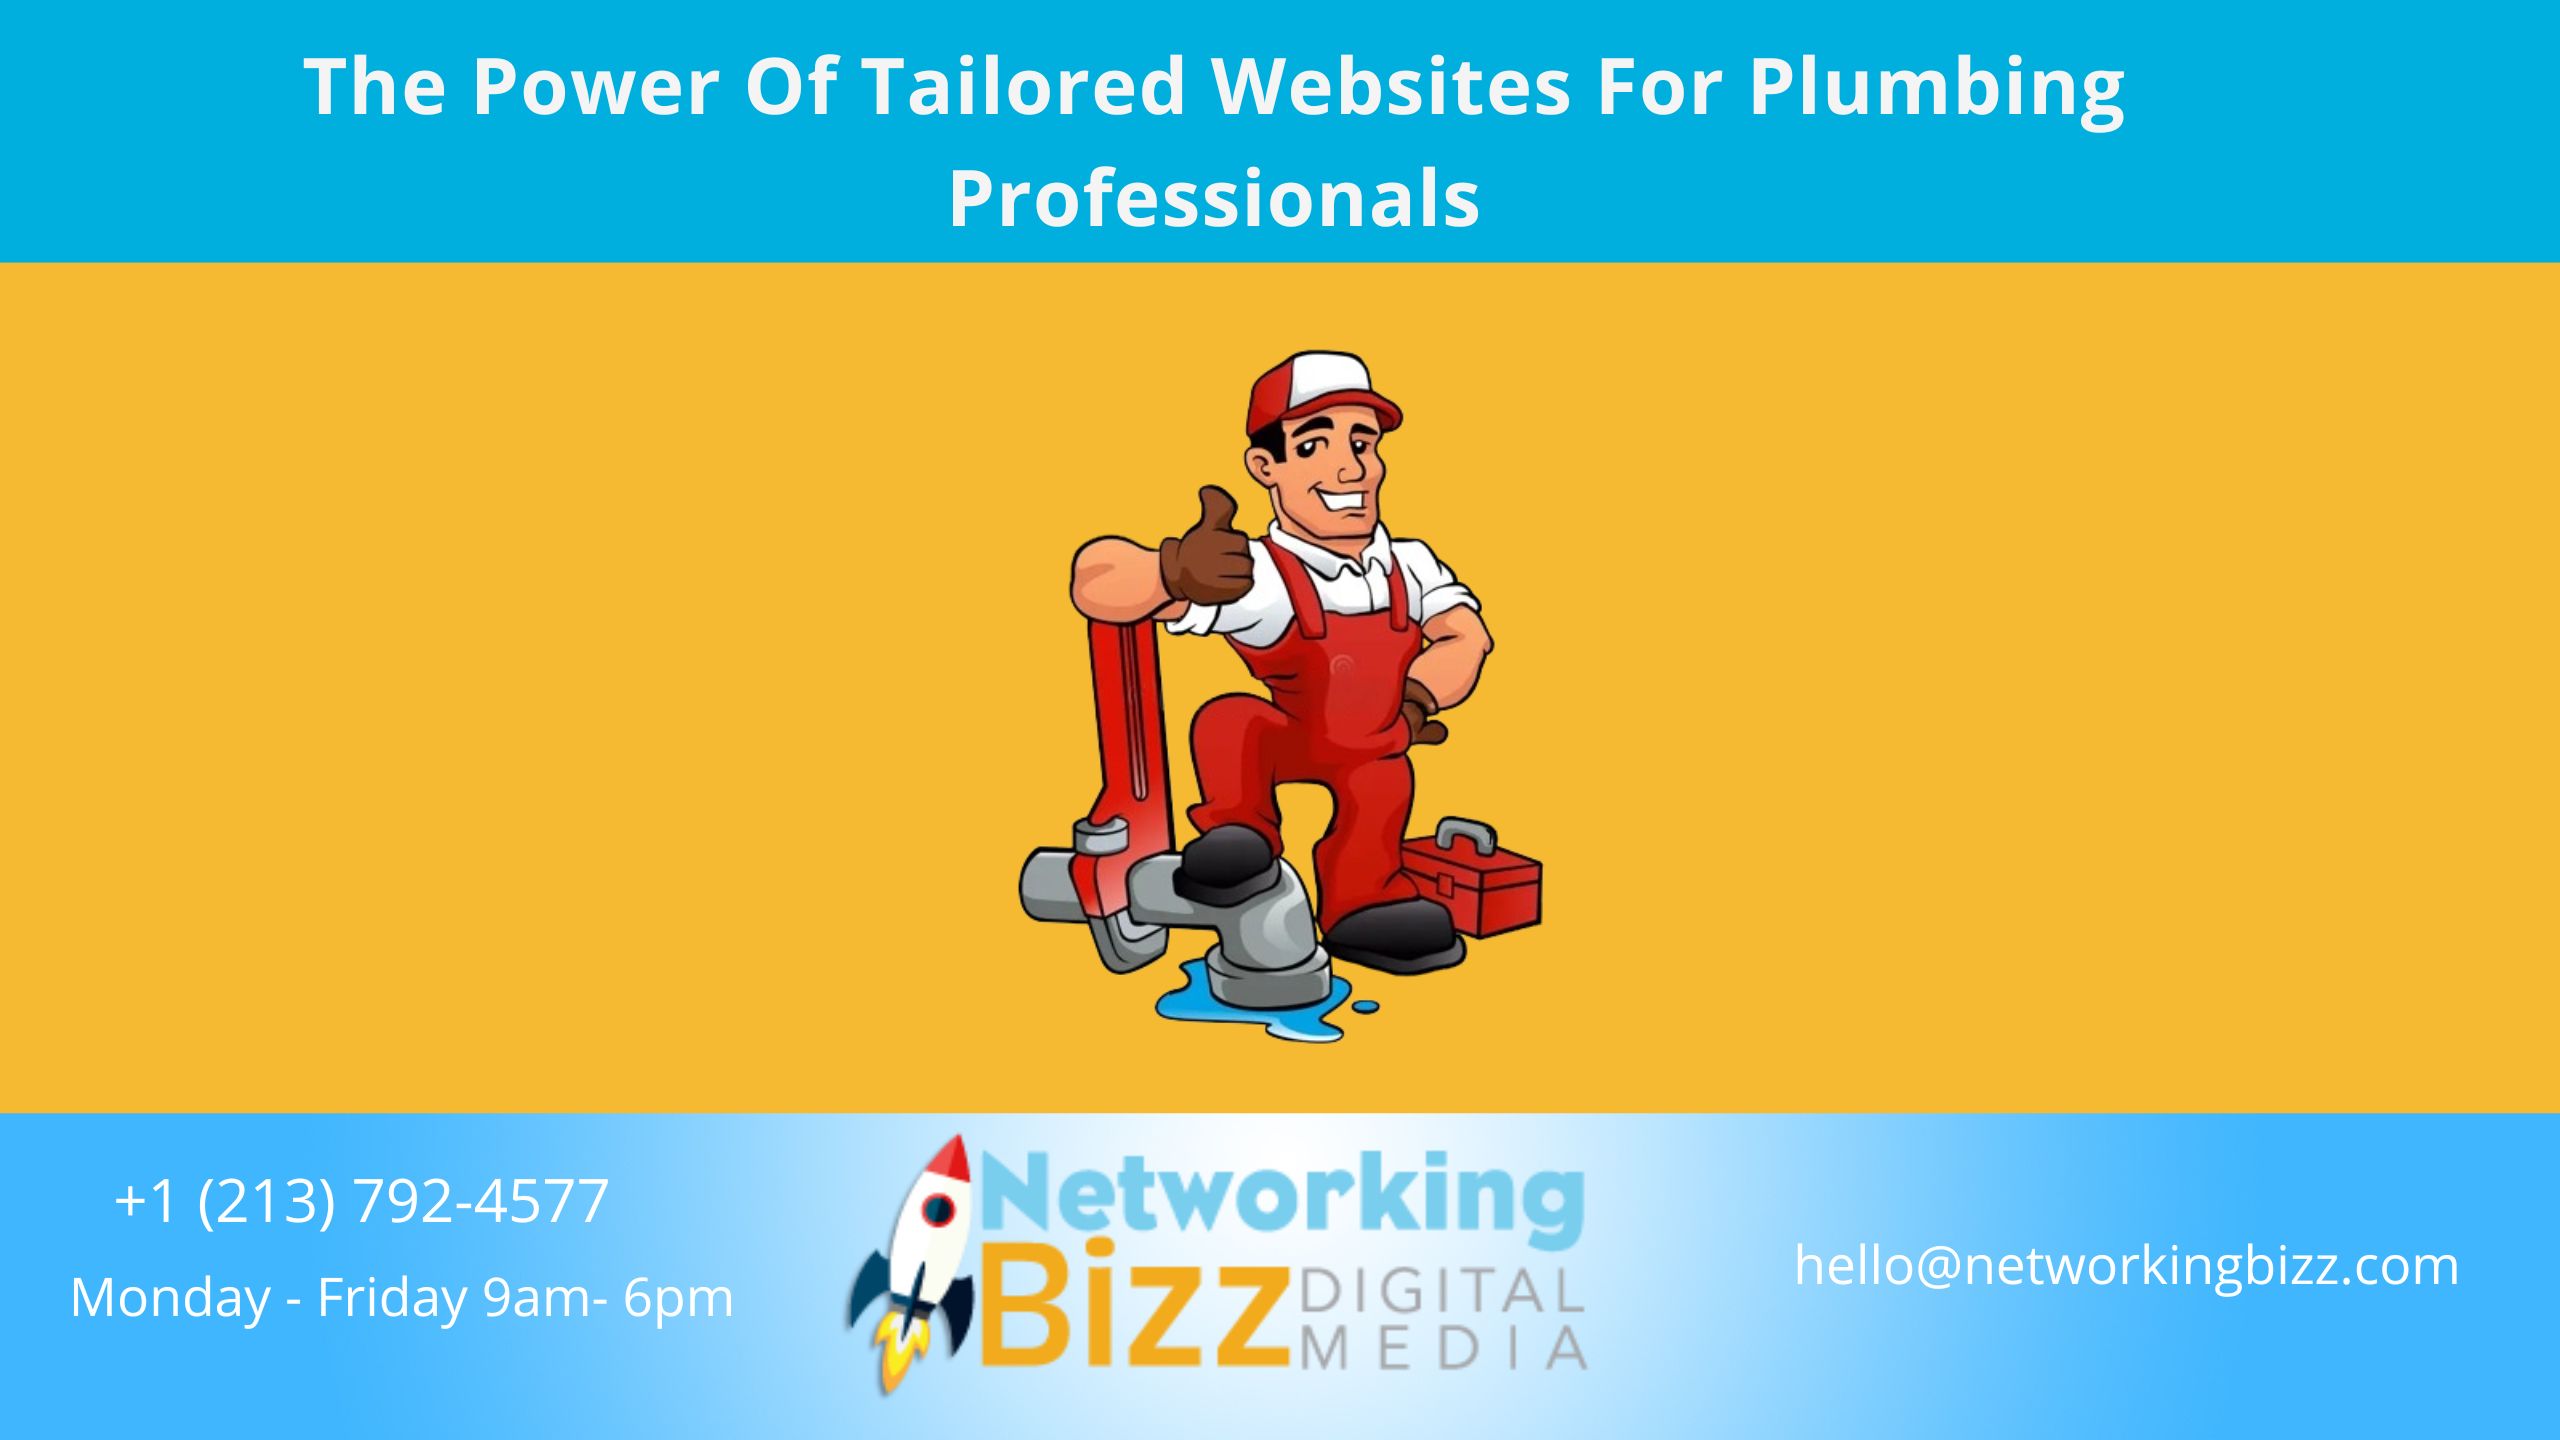 The Power Of Tailored Websites For Plumbing Professionals